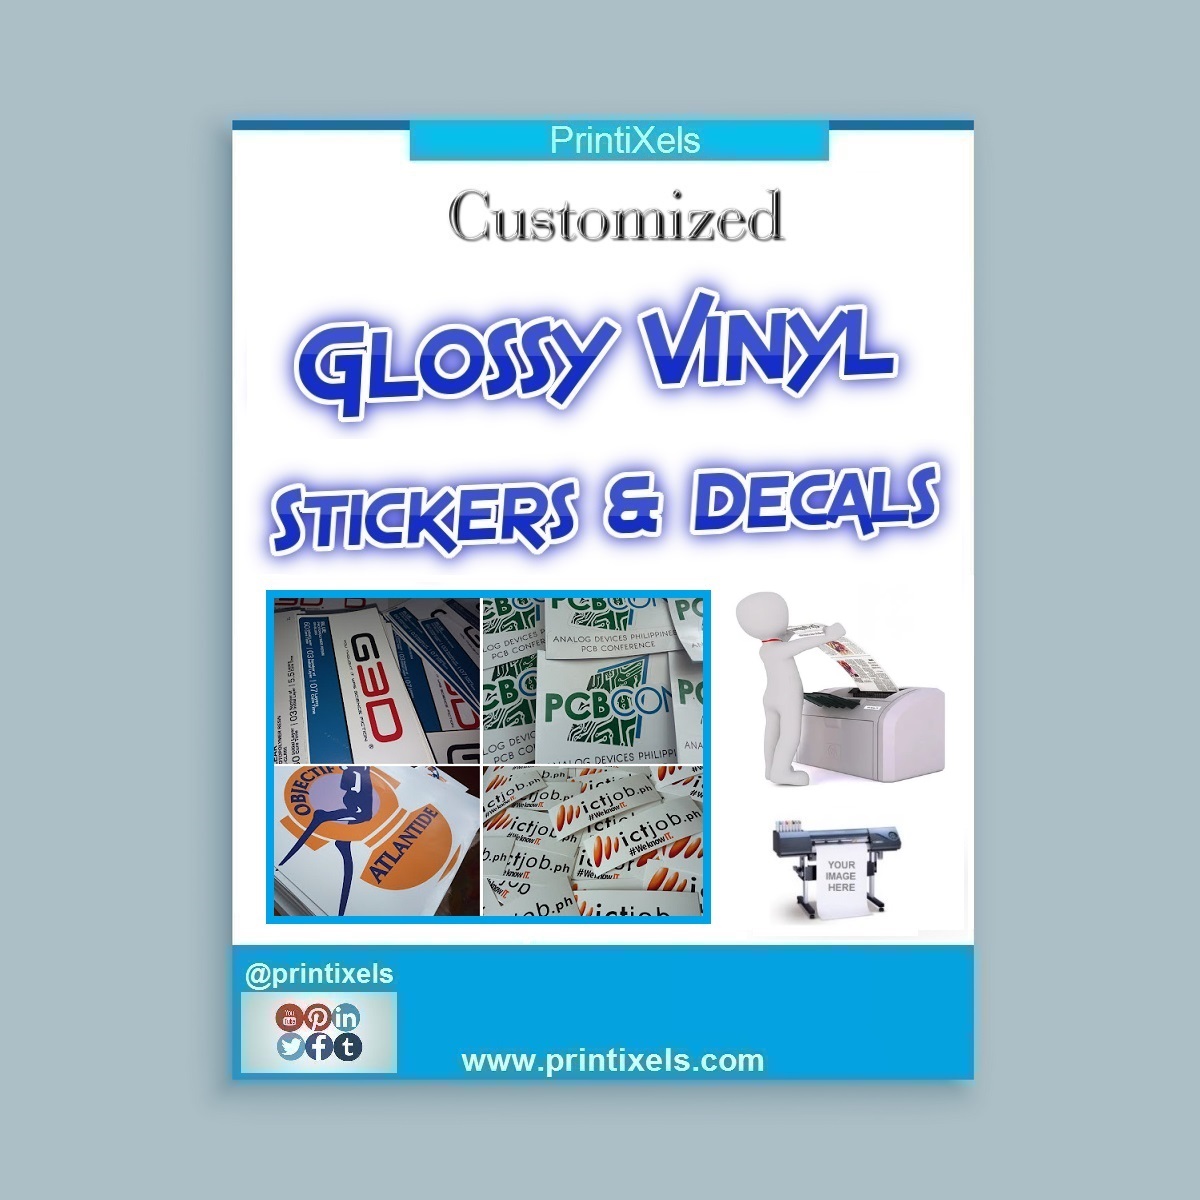 Customized Glossy Vinyl Stickers & Decals Philippines